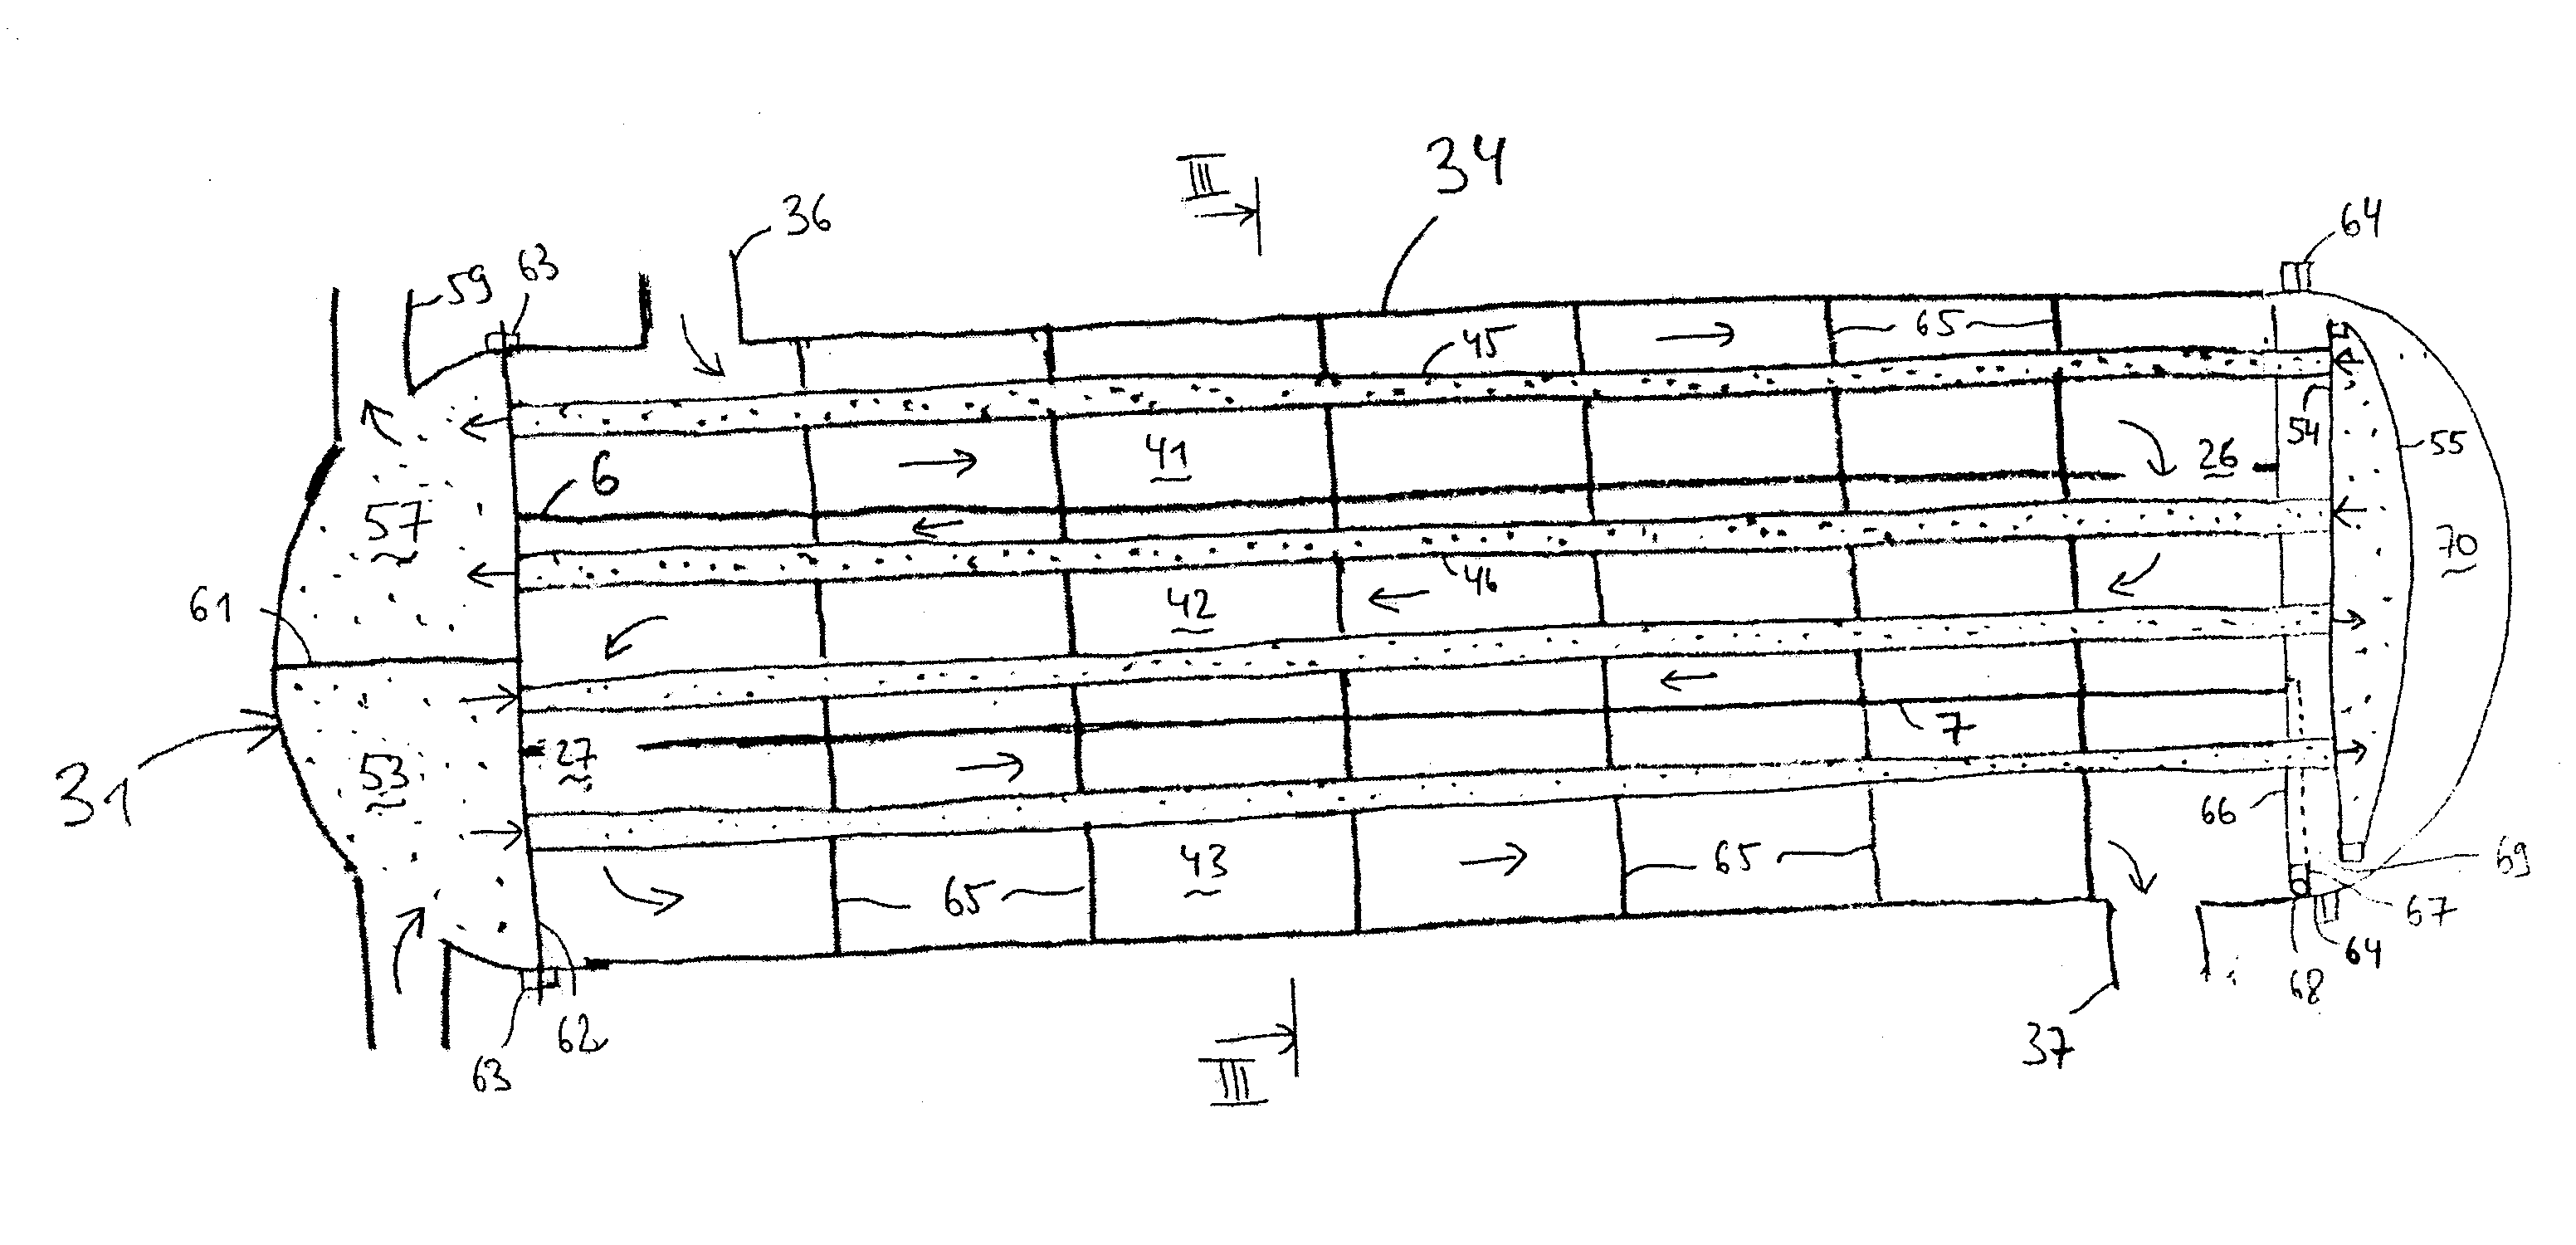 Assembly of baffles and seals and method of assembling a heat exhanger